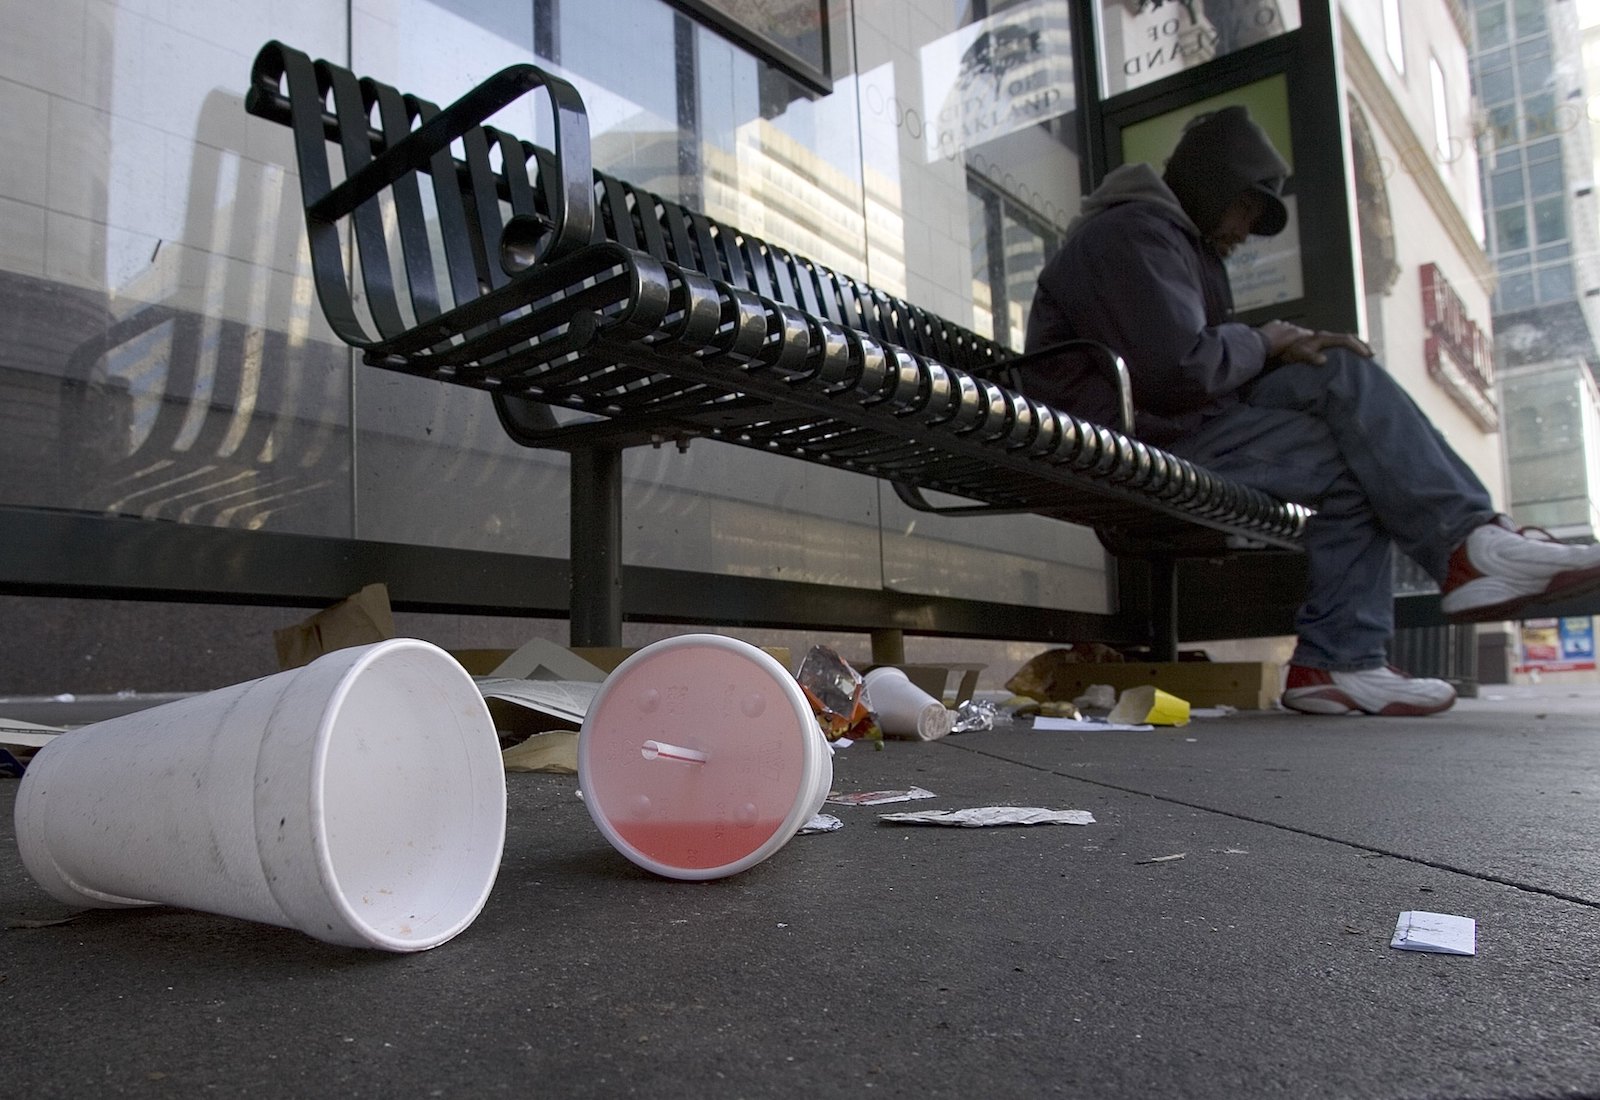 Used polystyrene cups below a park bench